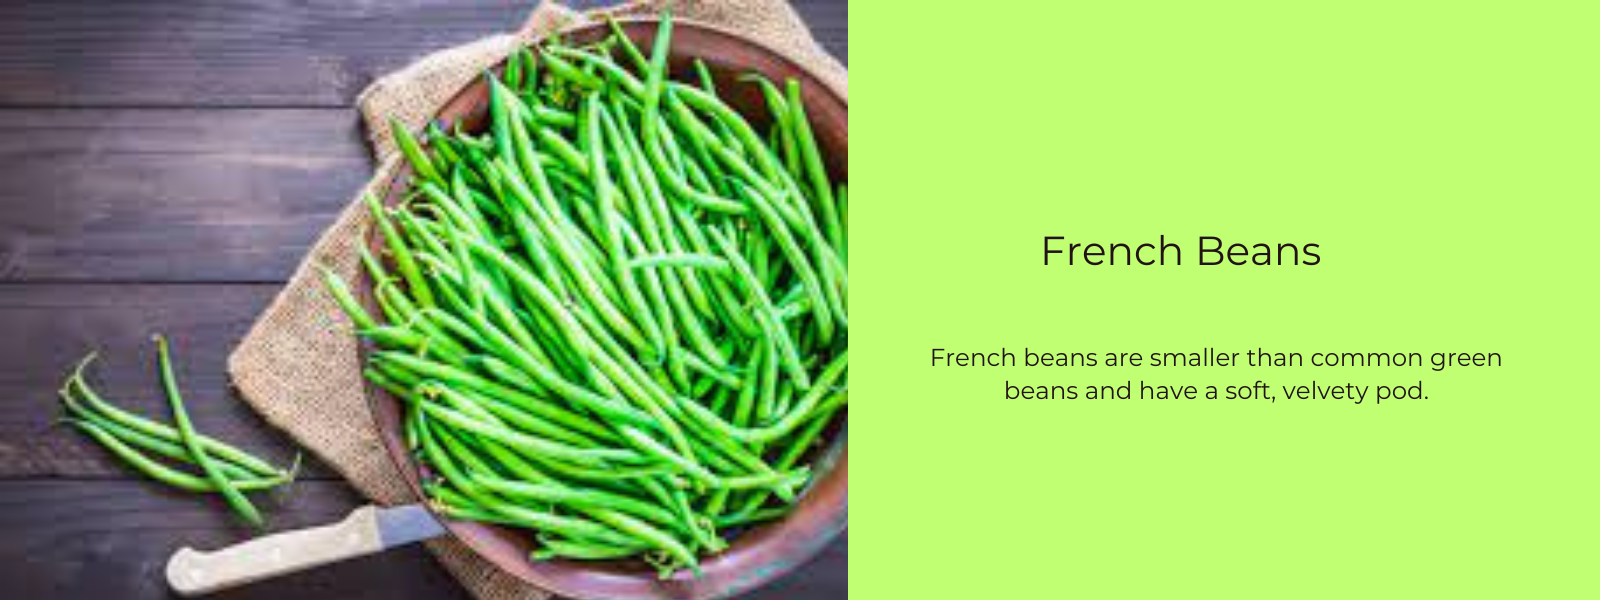 French Beans – Health Benefits, Uses and Important Facts